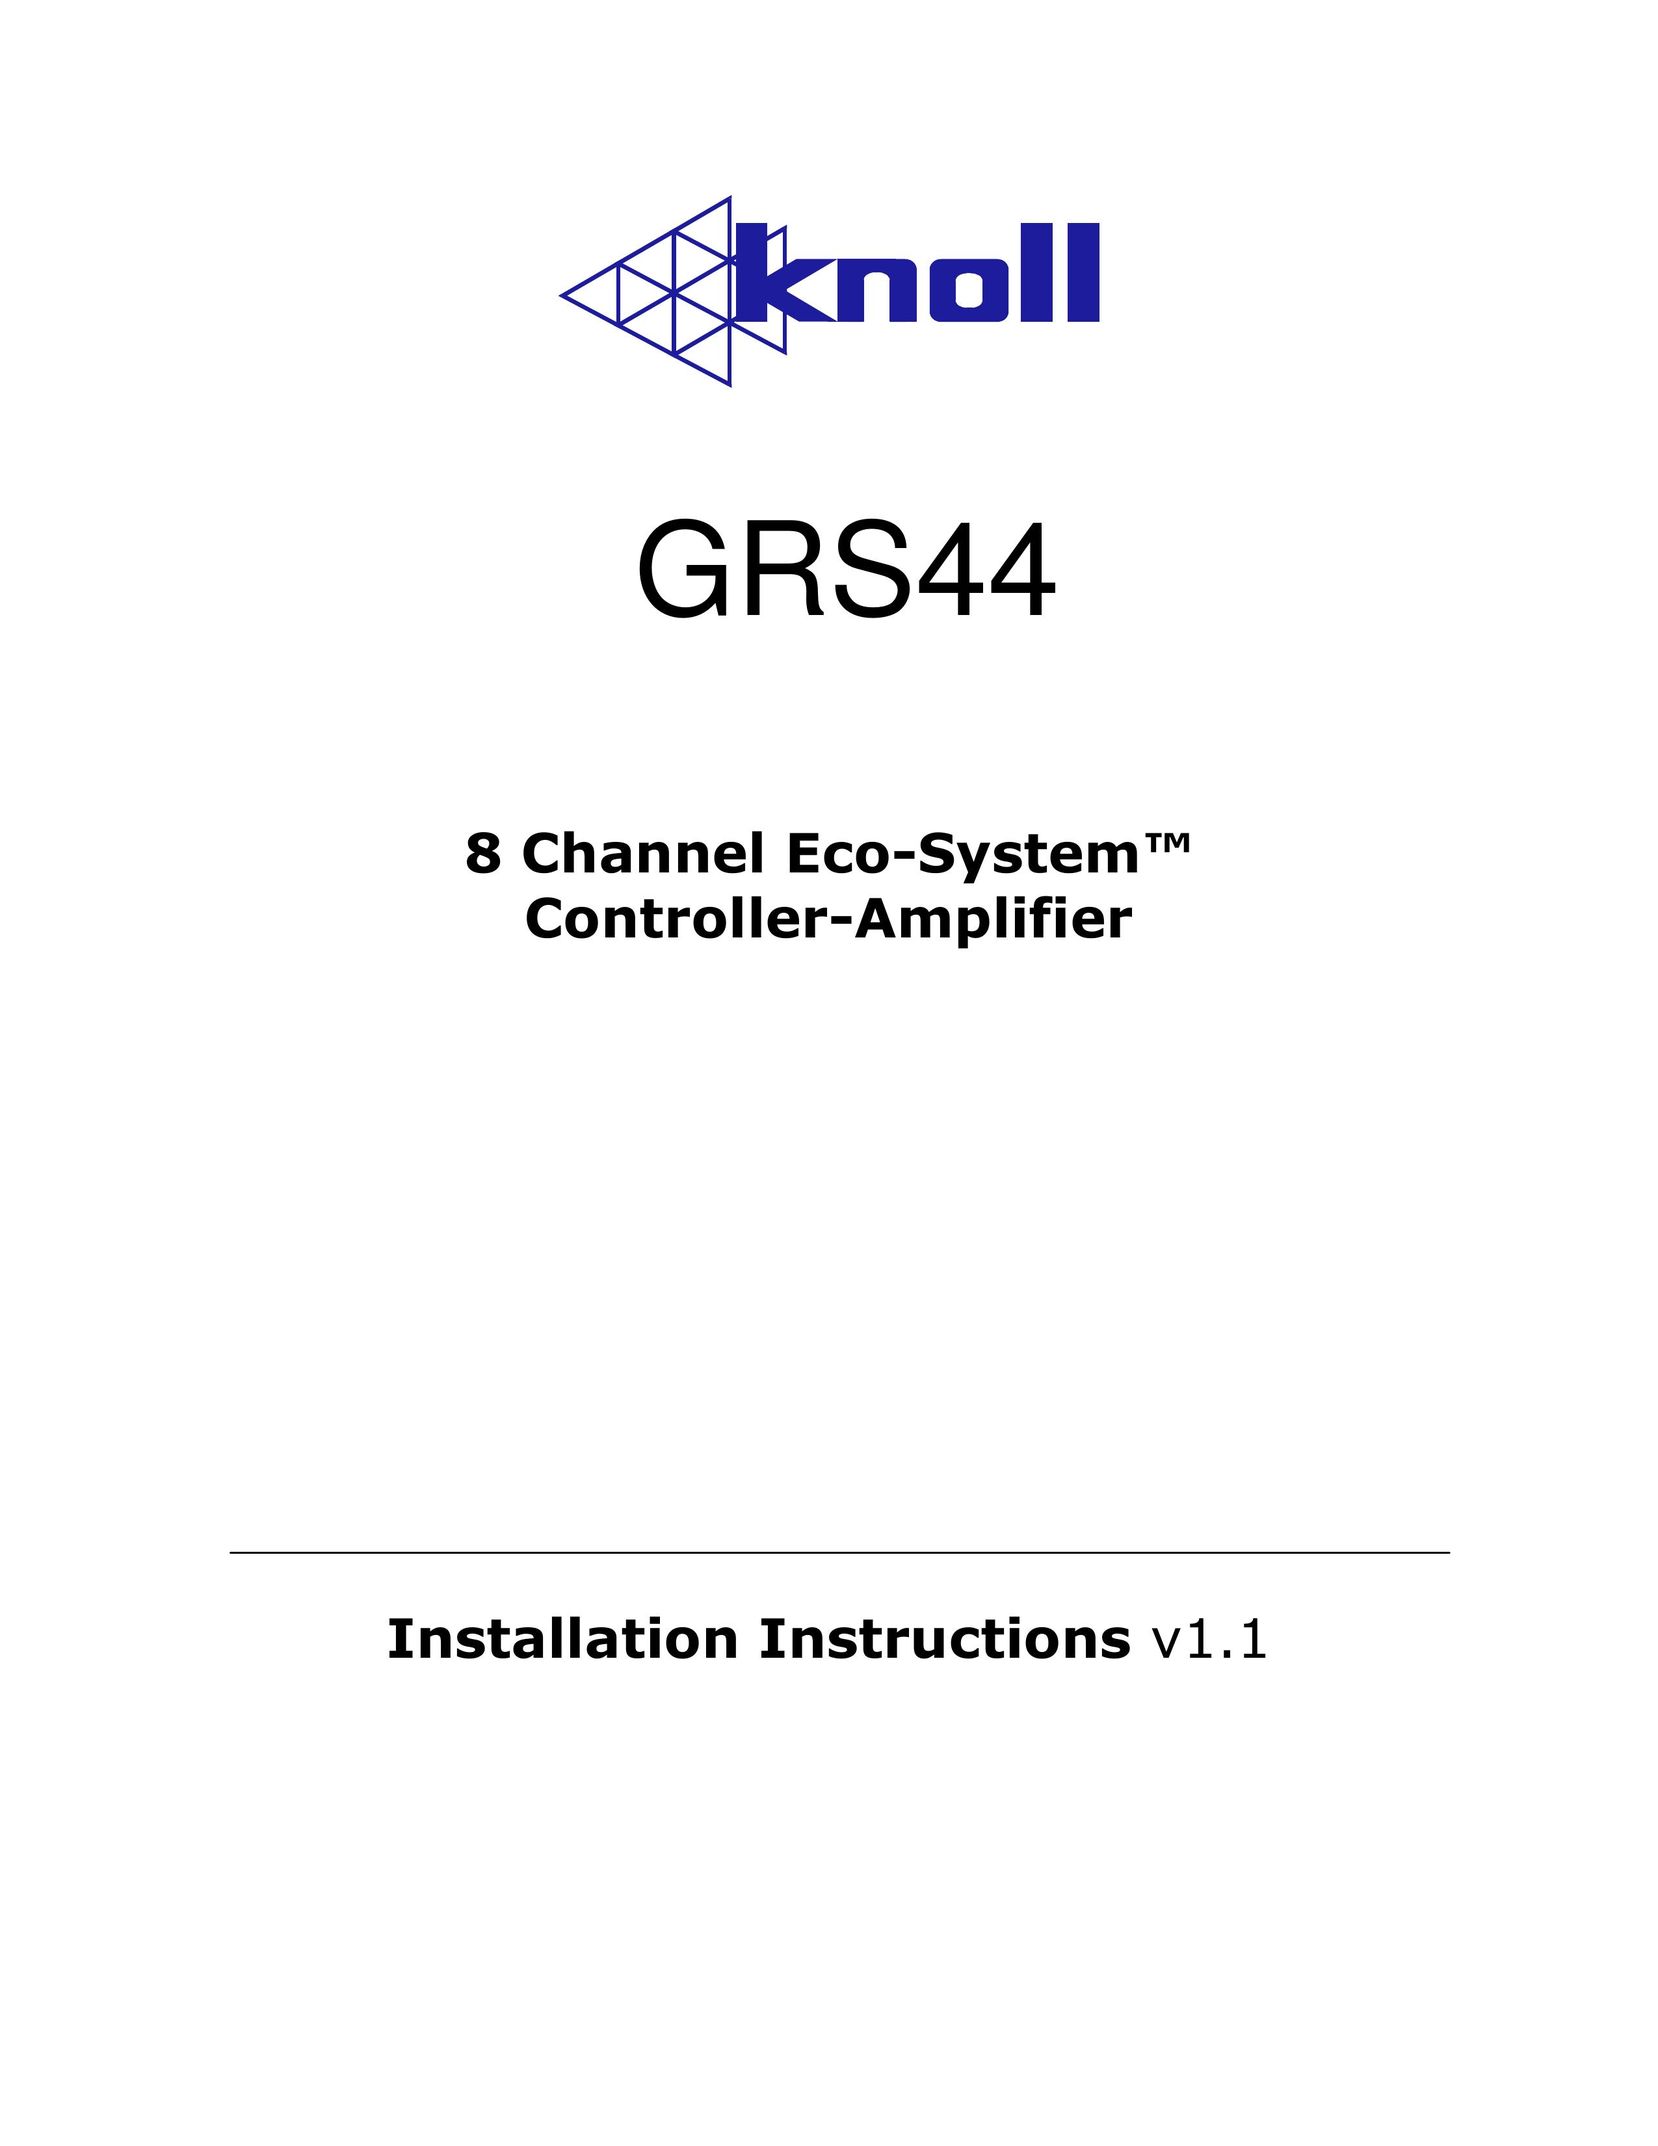 Knoll GRS44 Stereo Amplifier User Manual